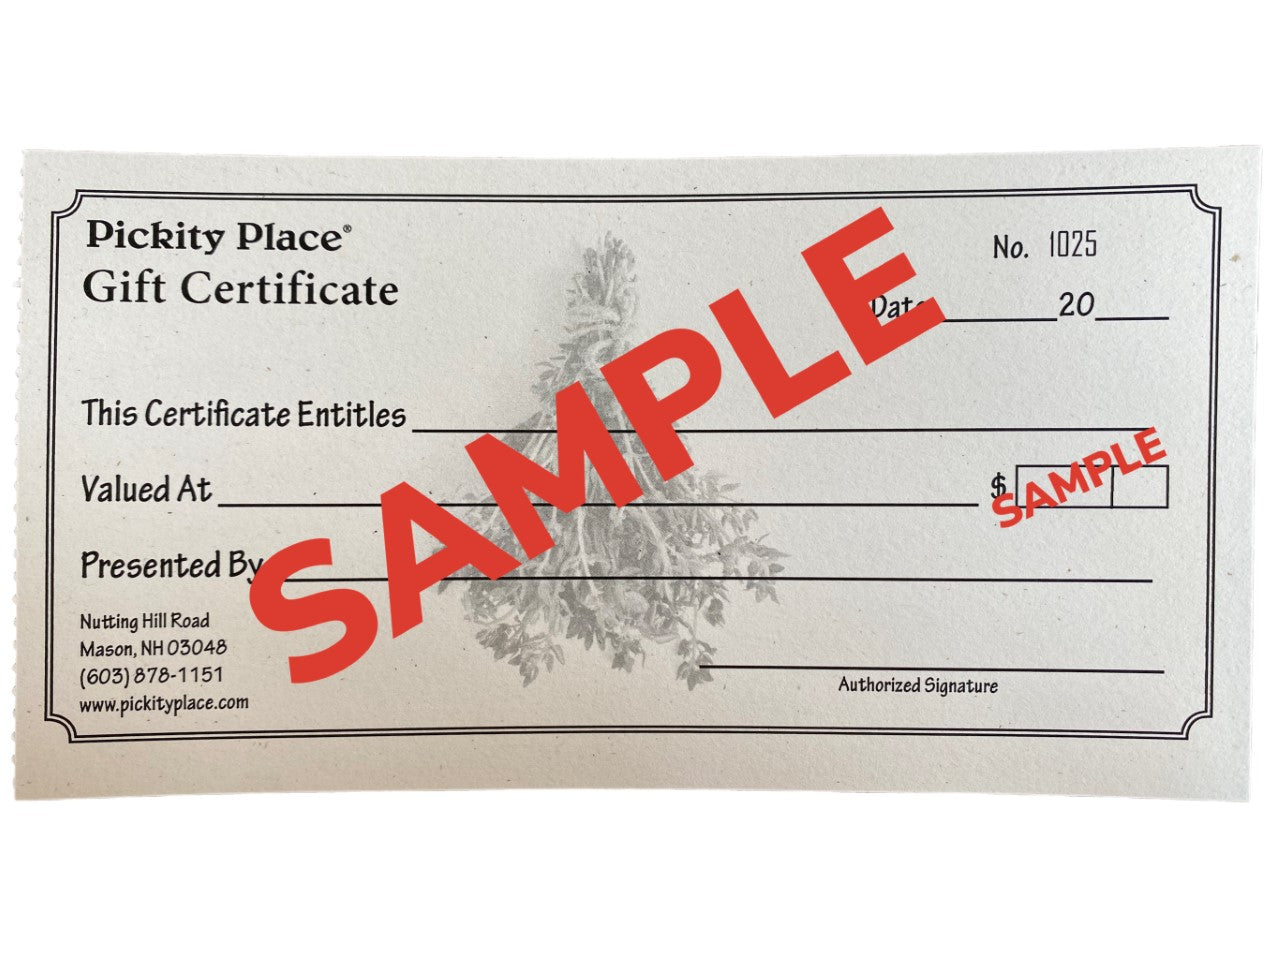 Pickity Place Gift Certificate